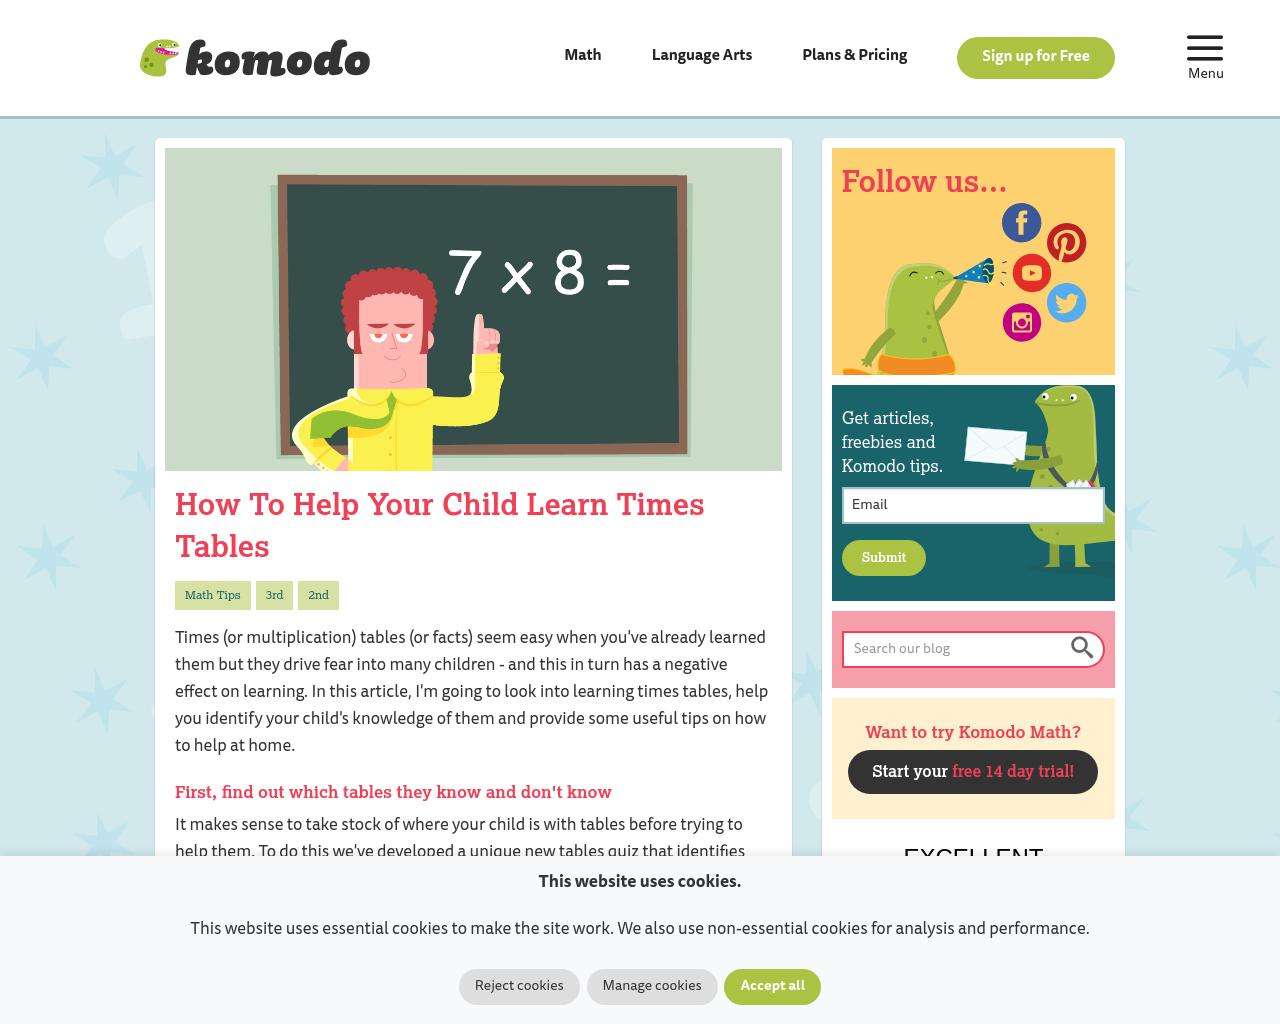 Helping your child learn timestables